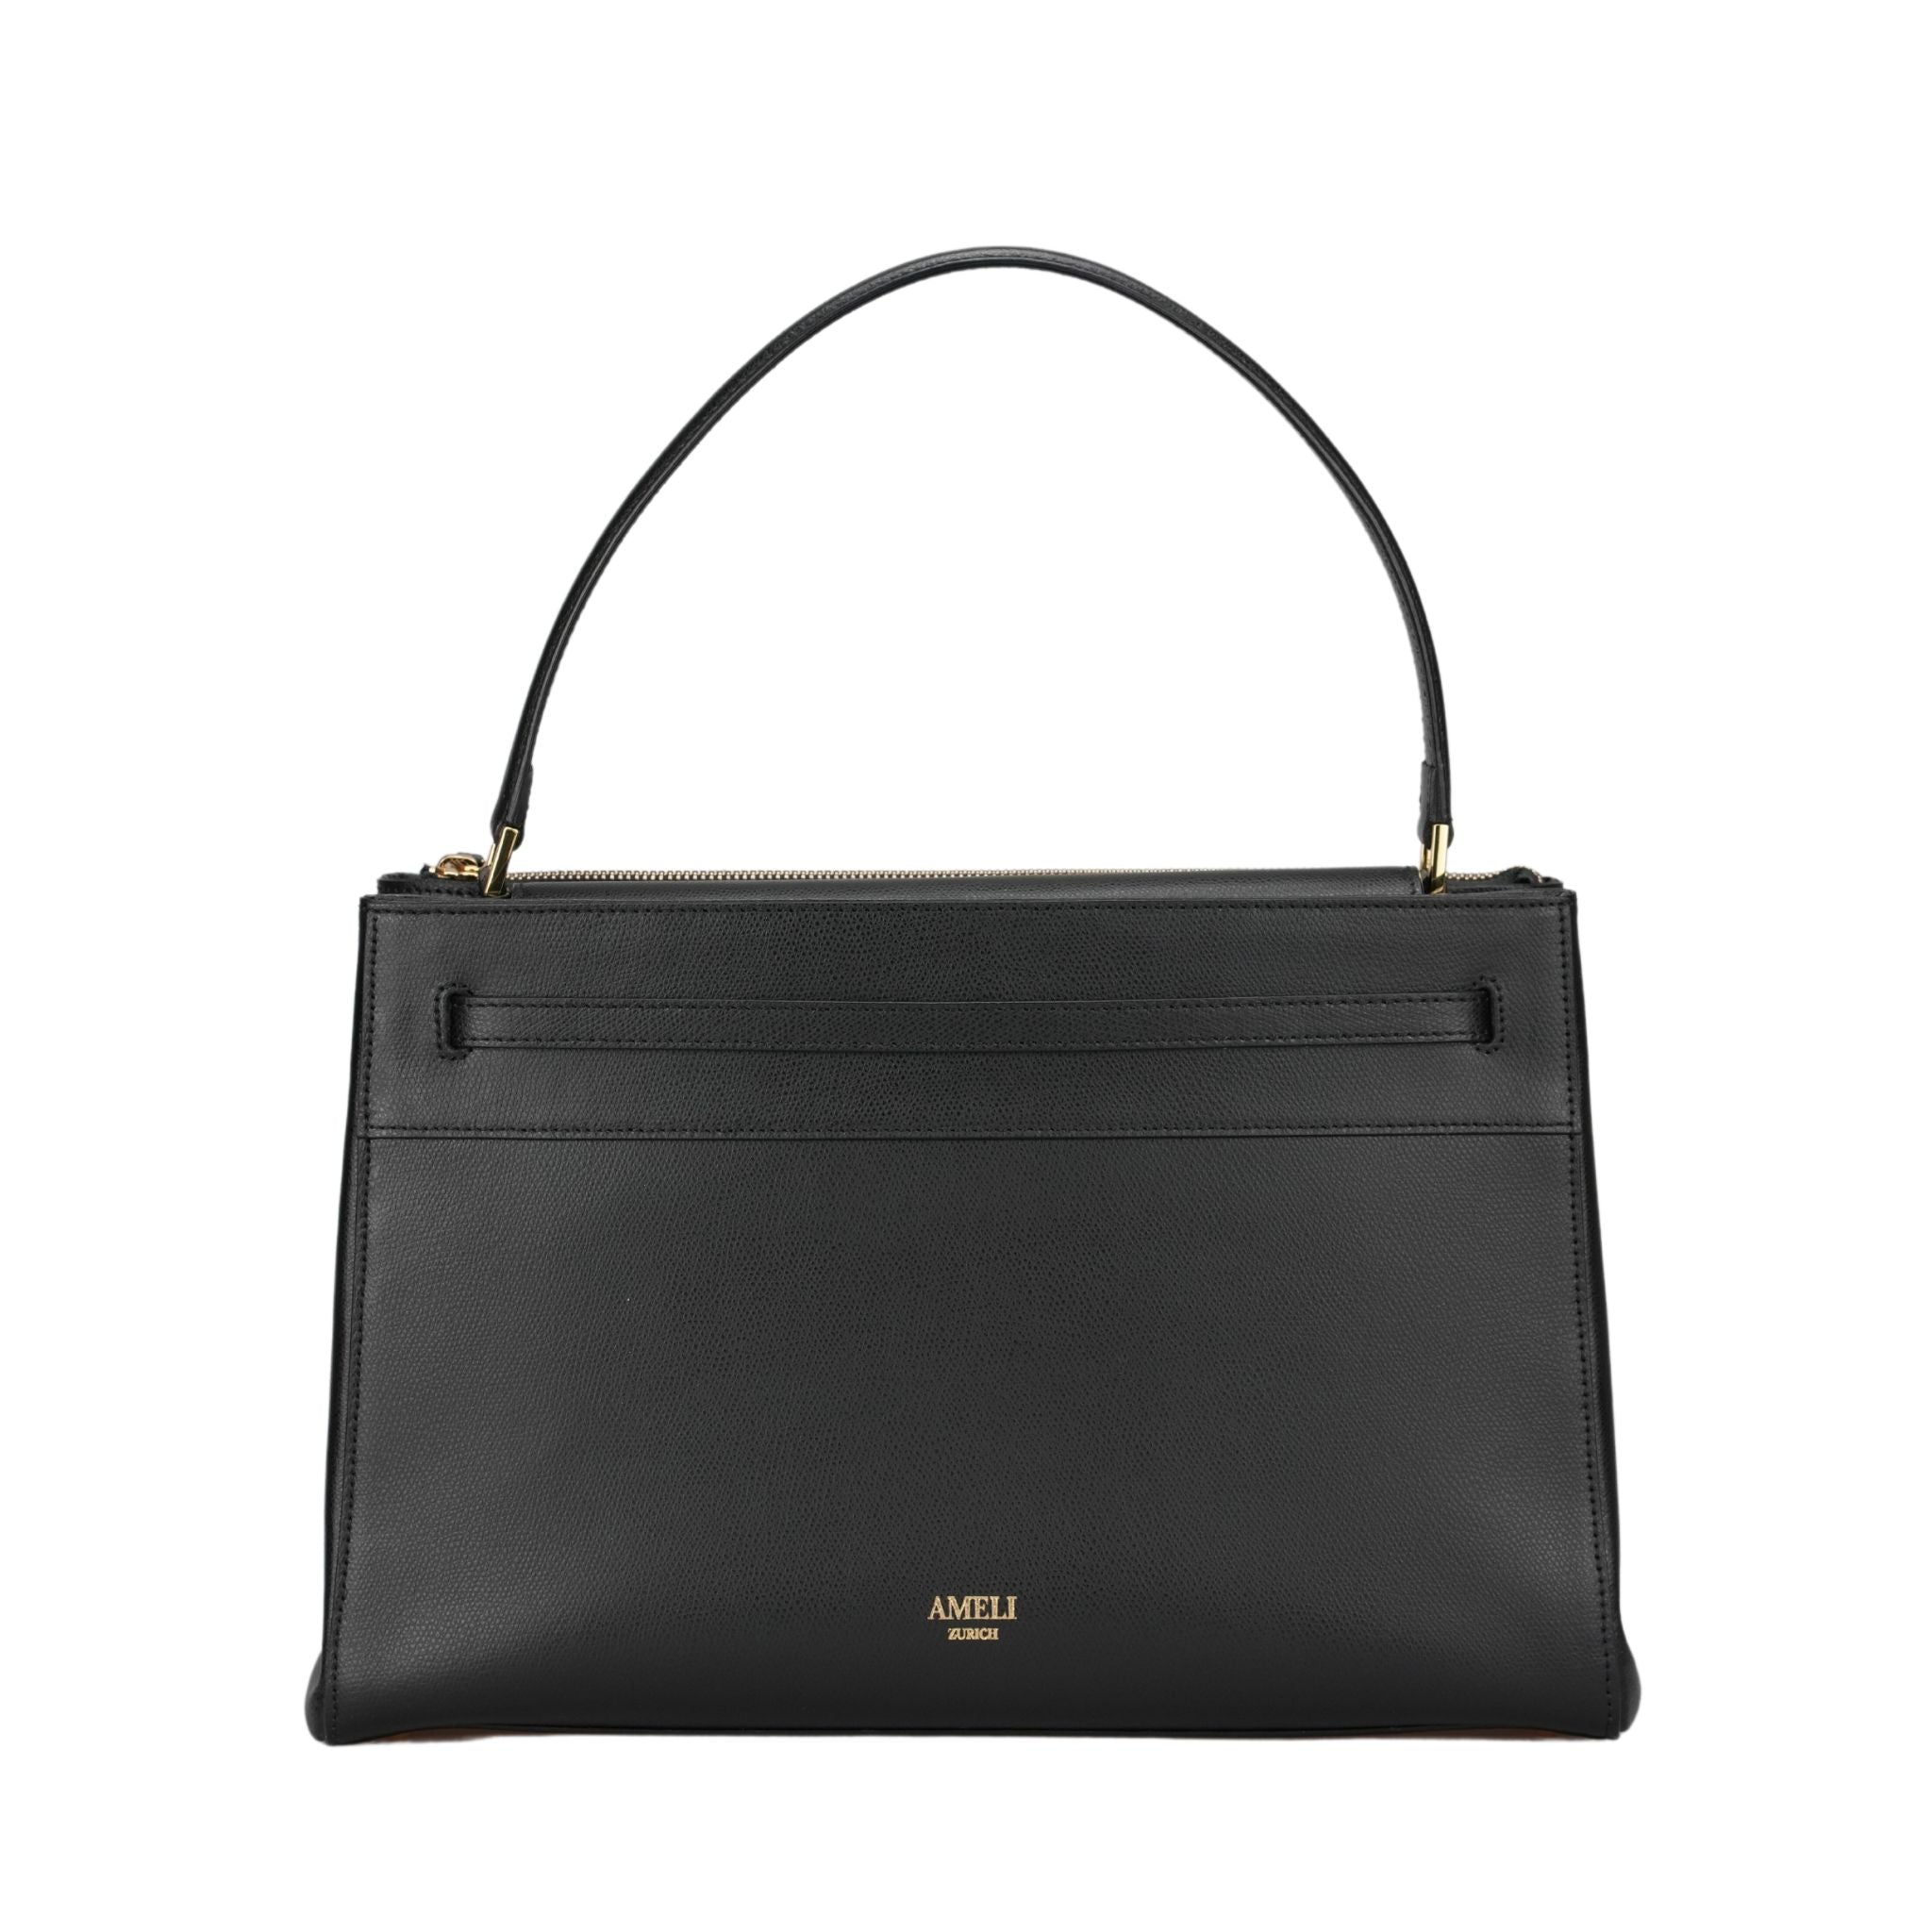 AMELI Zurich | SEEFELD | Black | Pebbled Leather | Front